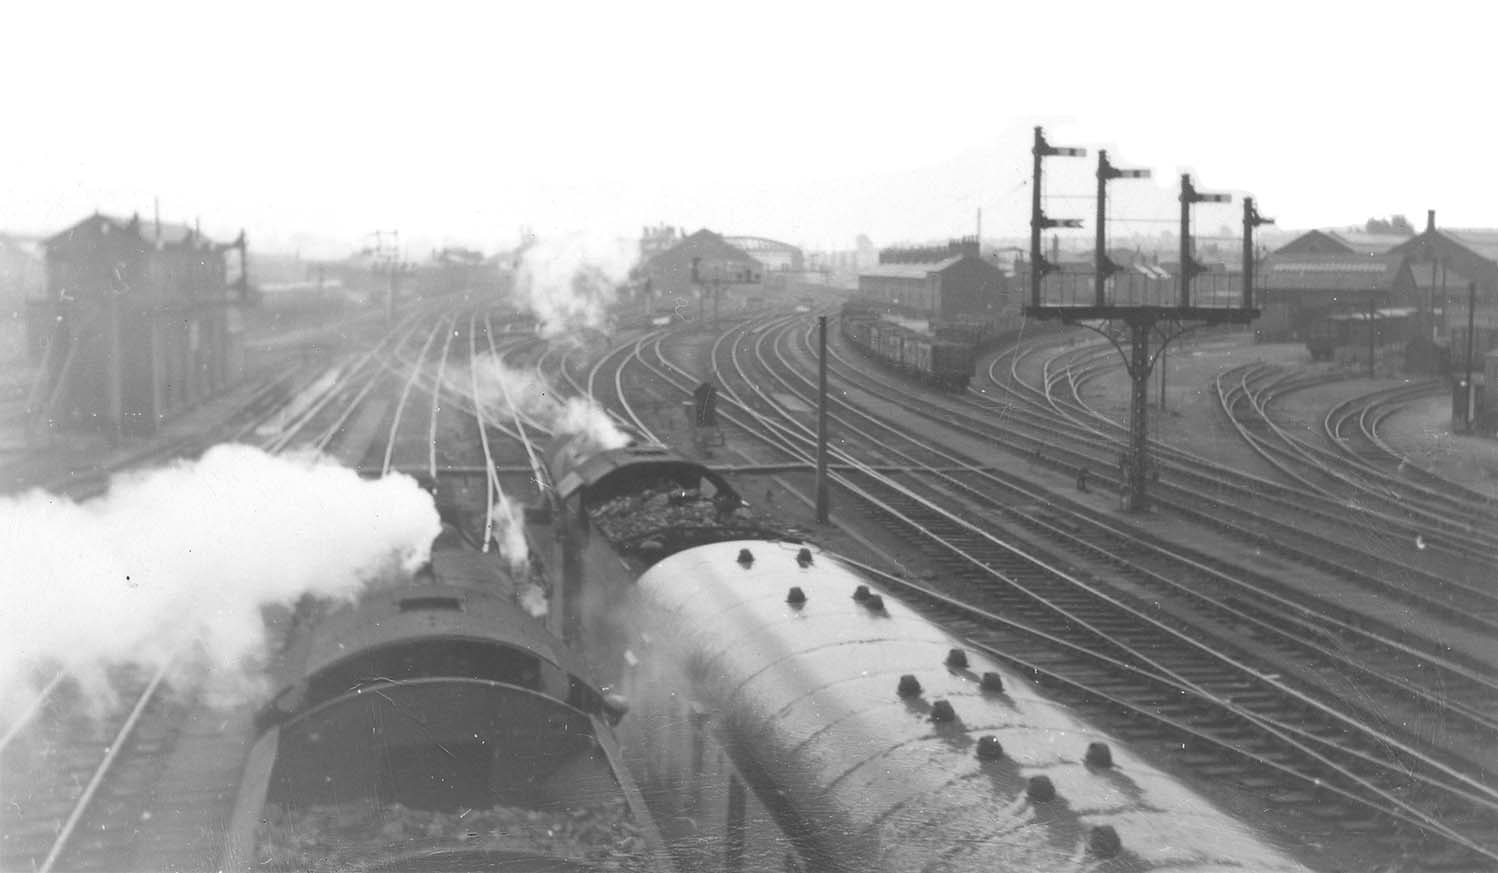 Looking towards Rugby station with Rugby No 5 Signal Cabin on the left and the goods and coal yard on the right